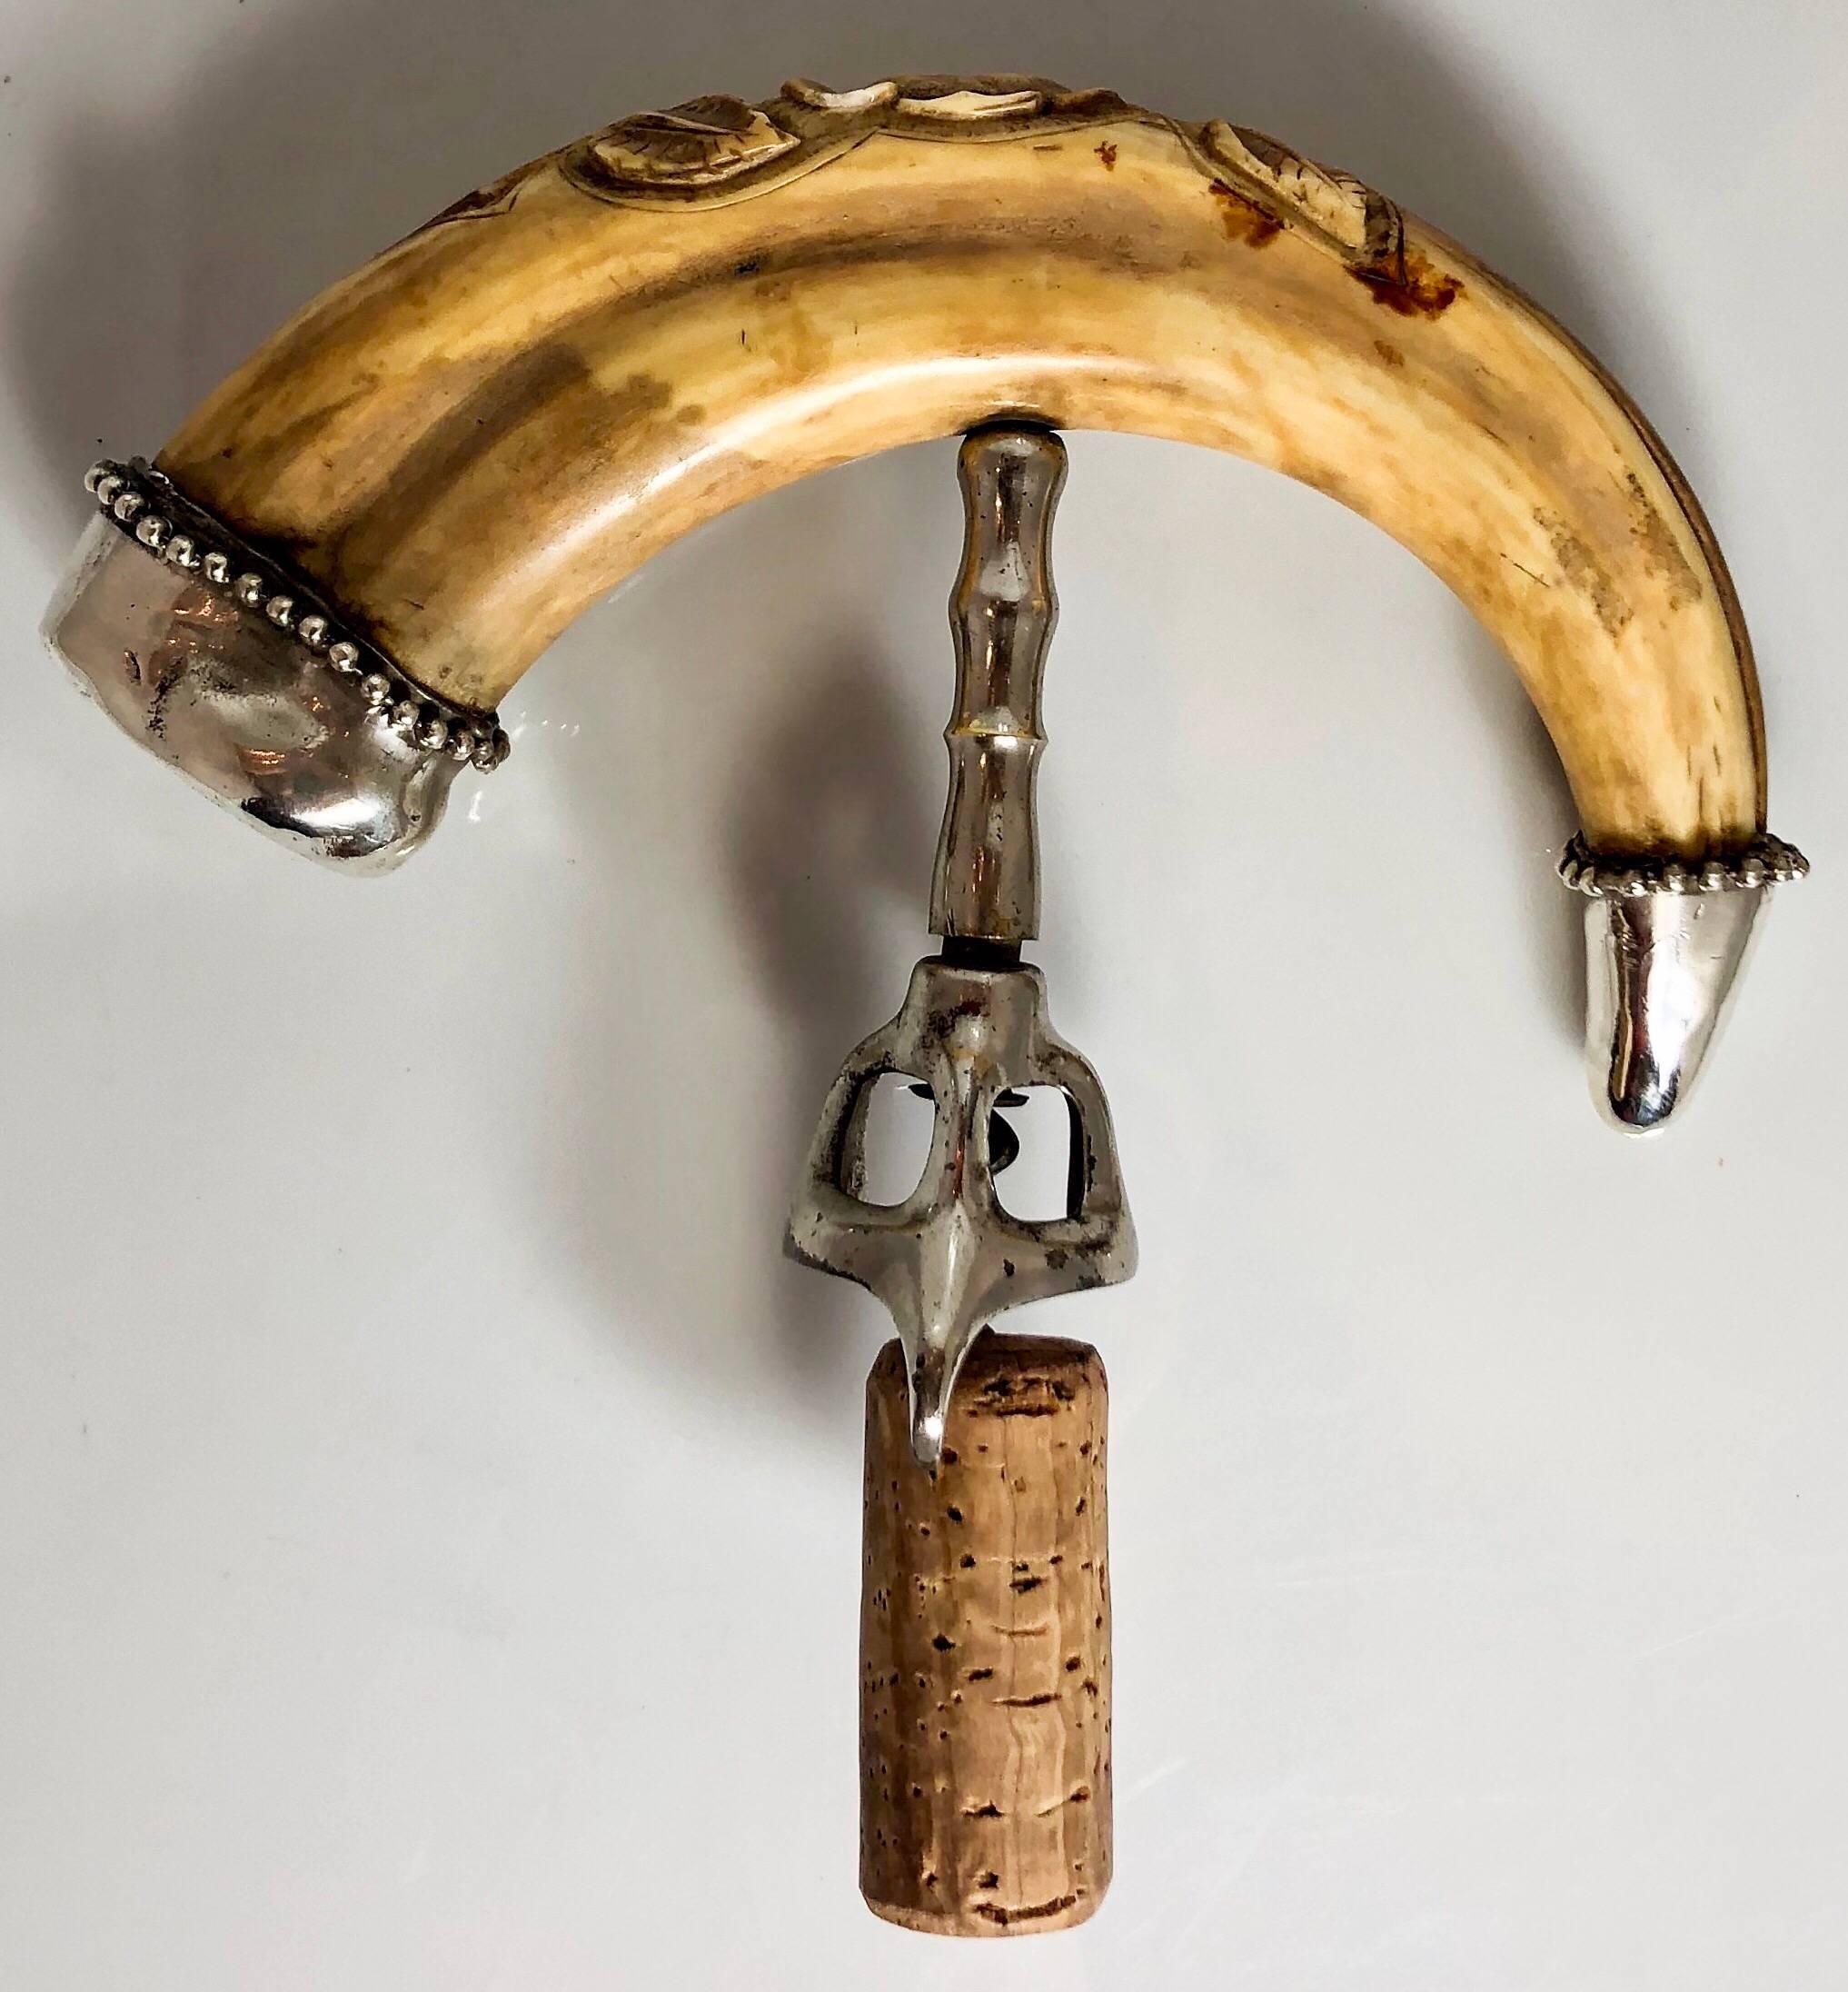 Antique carved boar's tusk corkscrew with sterling silver mounts, circa 1880-1890.